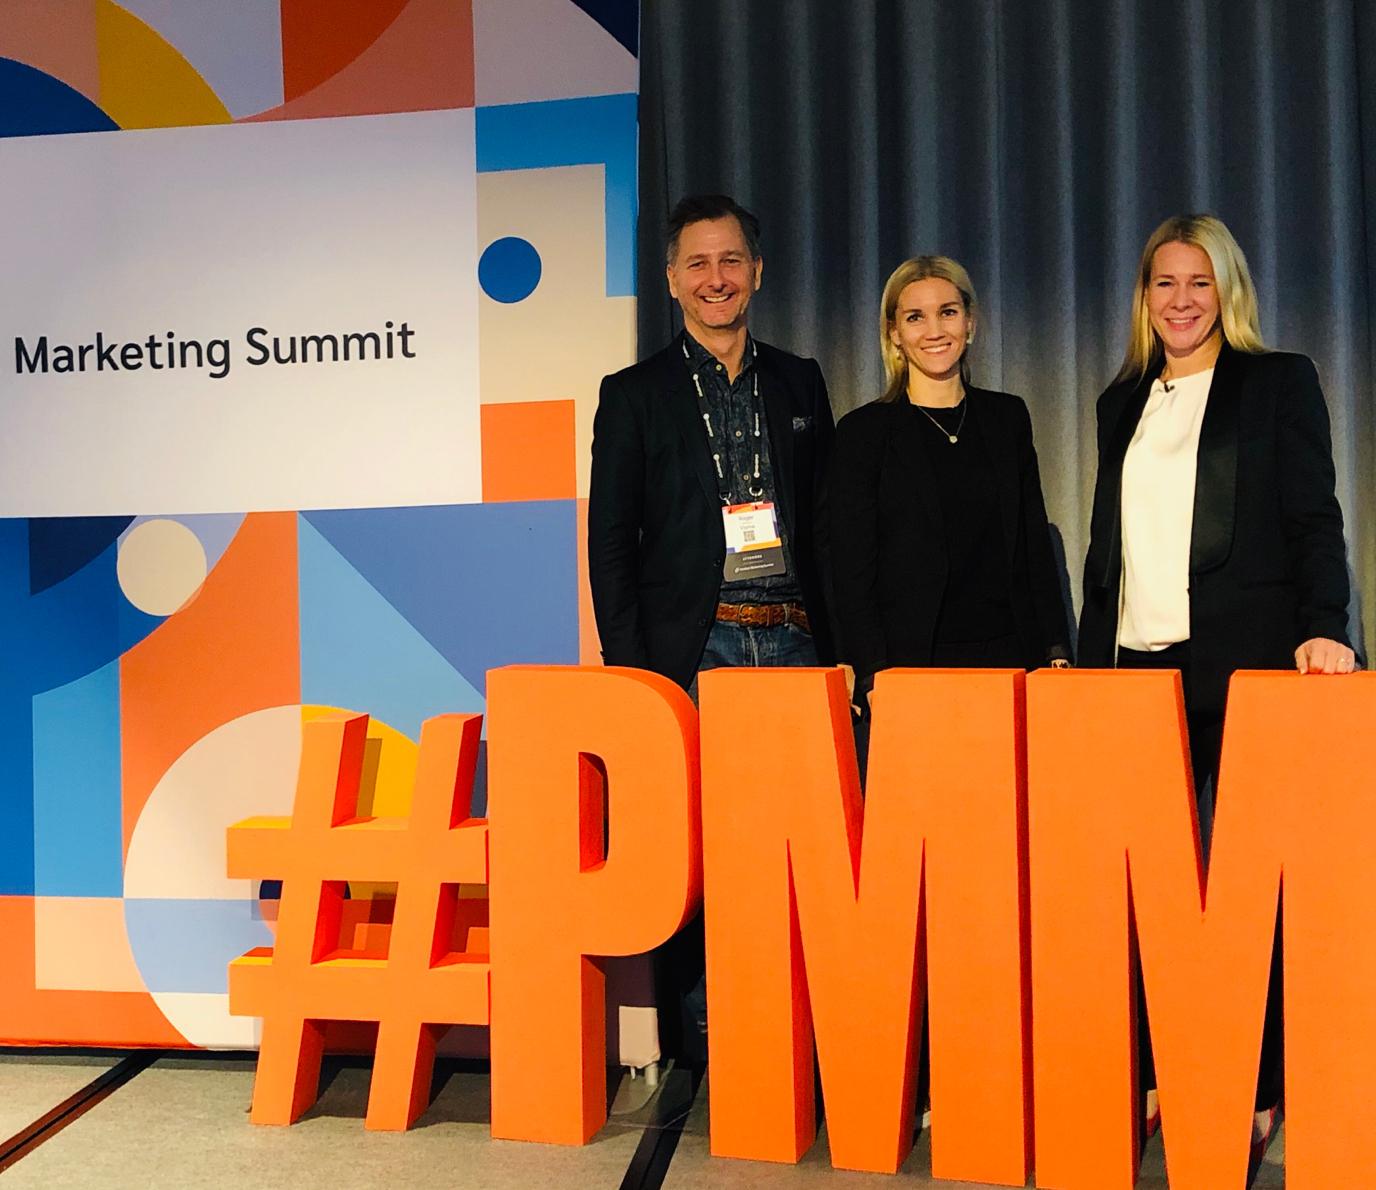 PMA wanted to get insight into how a growing international company like Visma work with go-to-market strategies for global cloud products